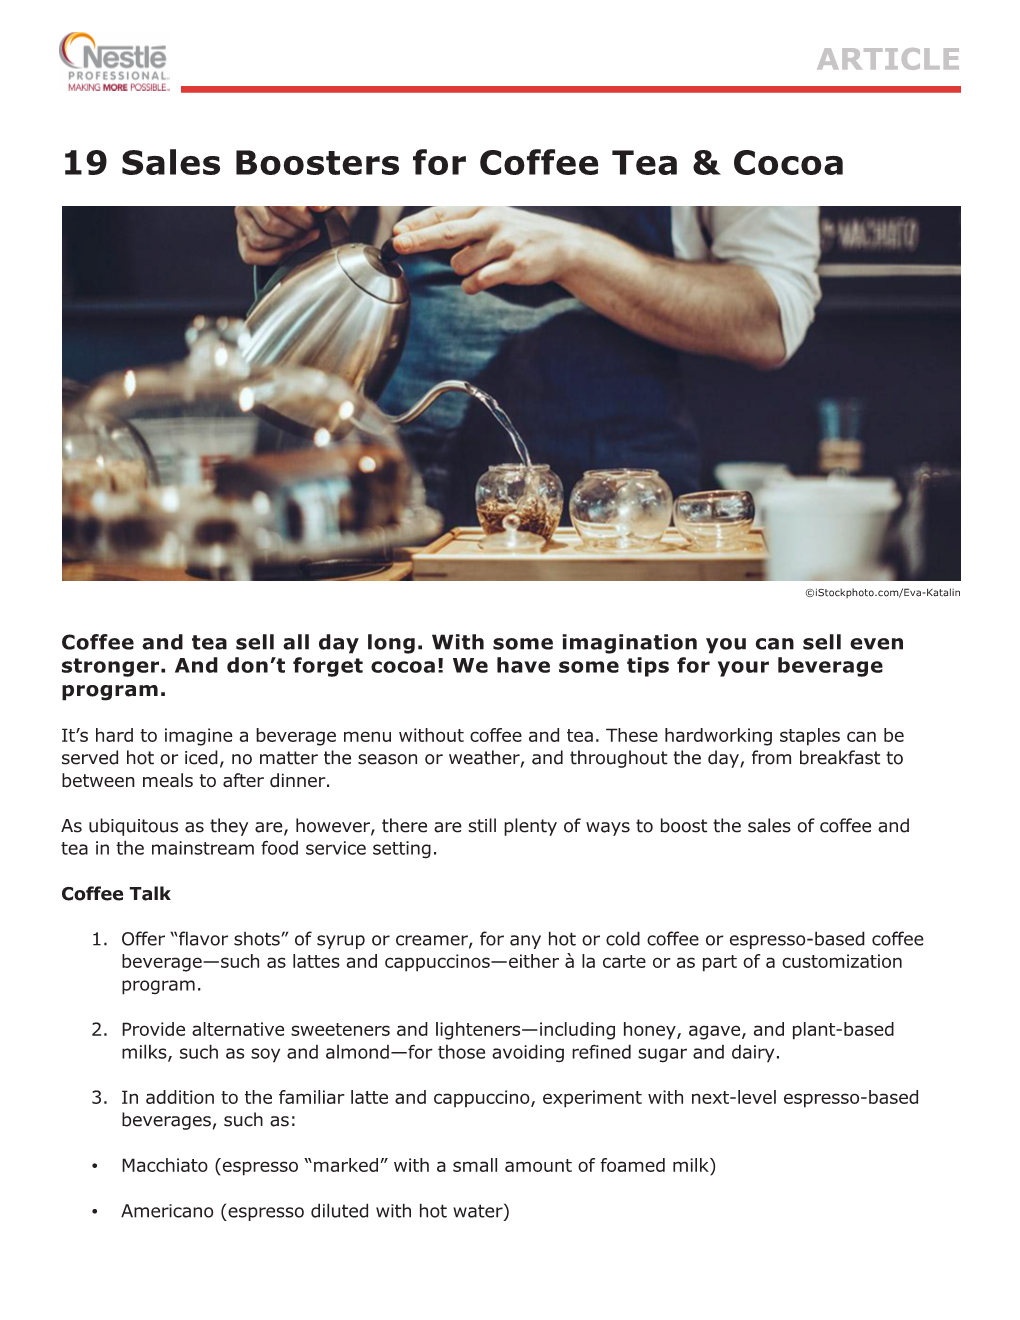 19 Sales Boosters for Coffee Tea & Cocoa